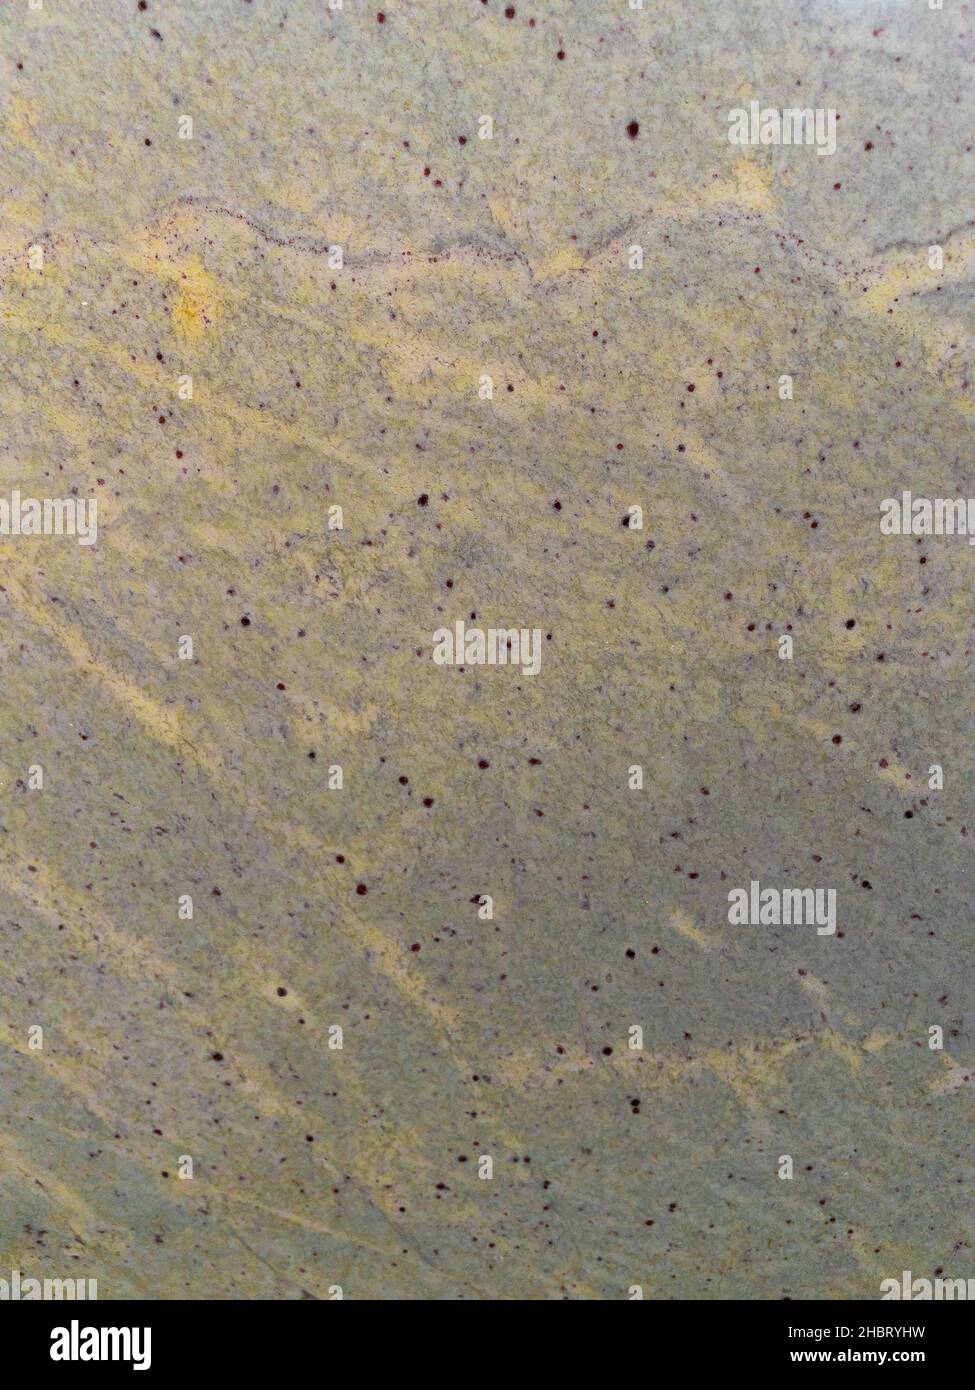 Close up Selective focus Abstract image of patterns and designs on Granite stone as background Stock Photo